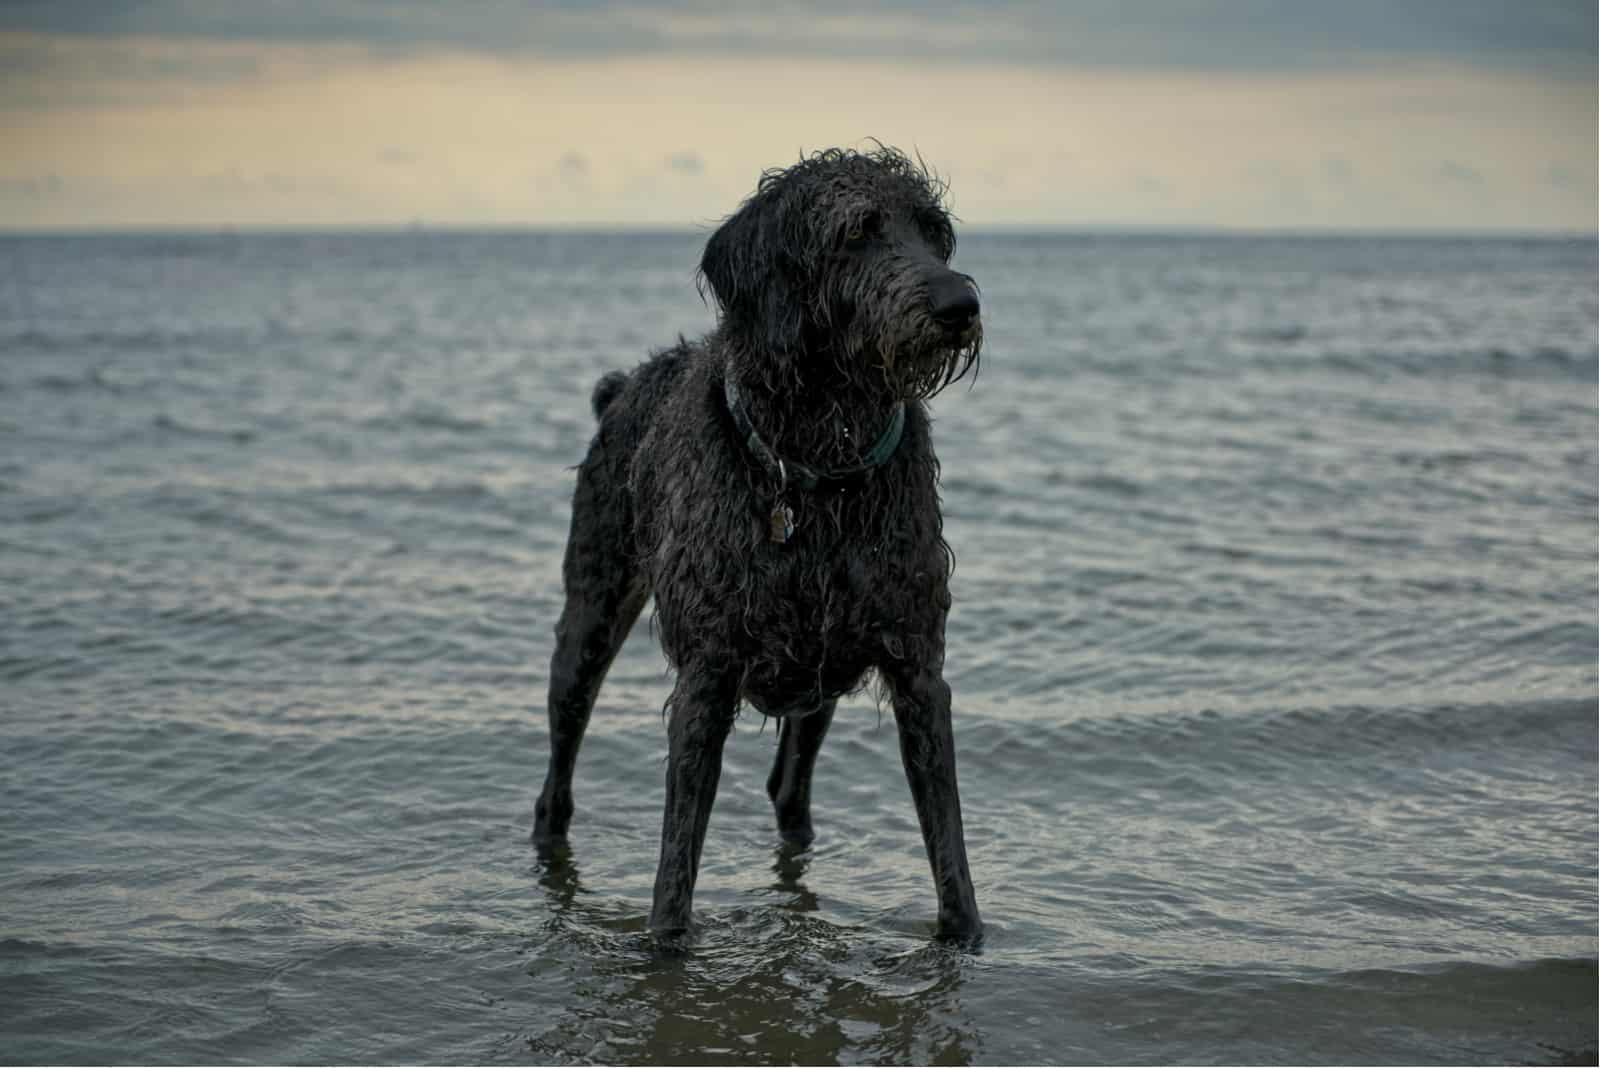 Weimardoodle dog standing in shallow water on the beach